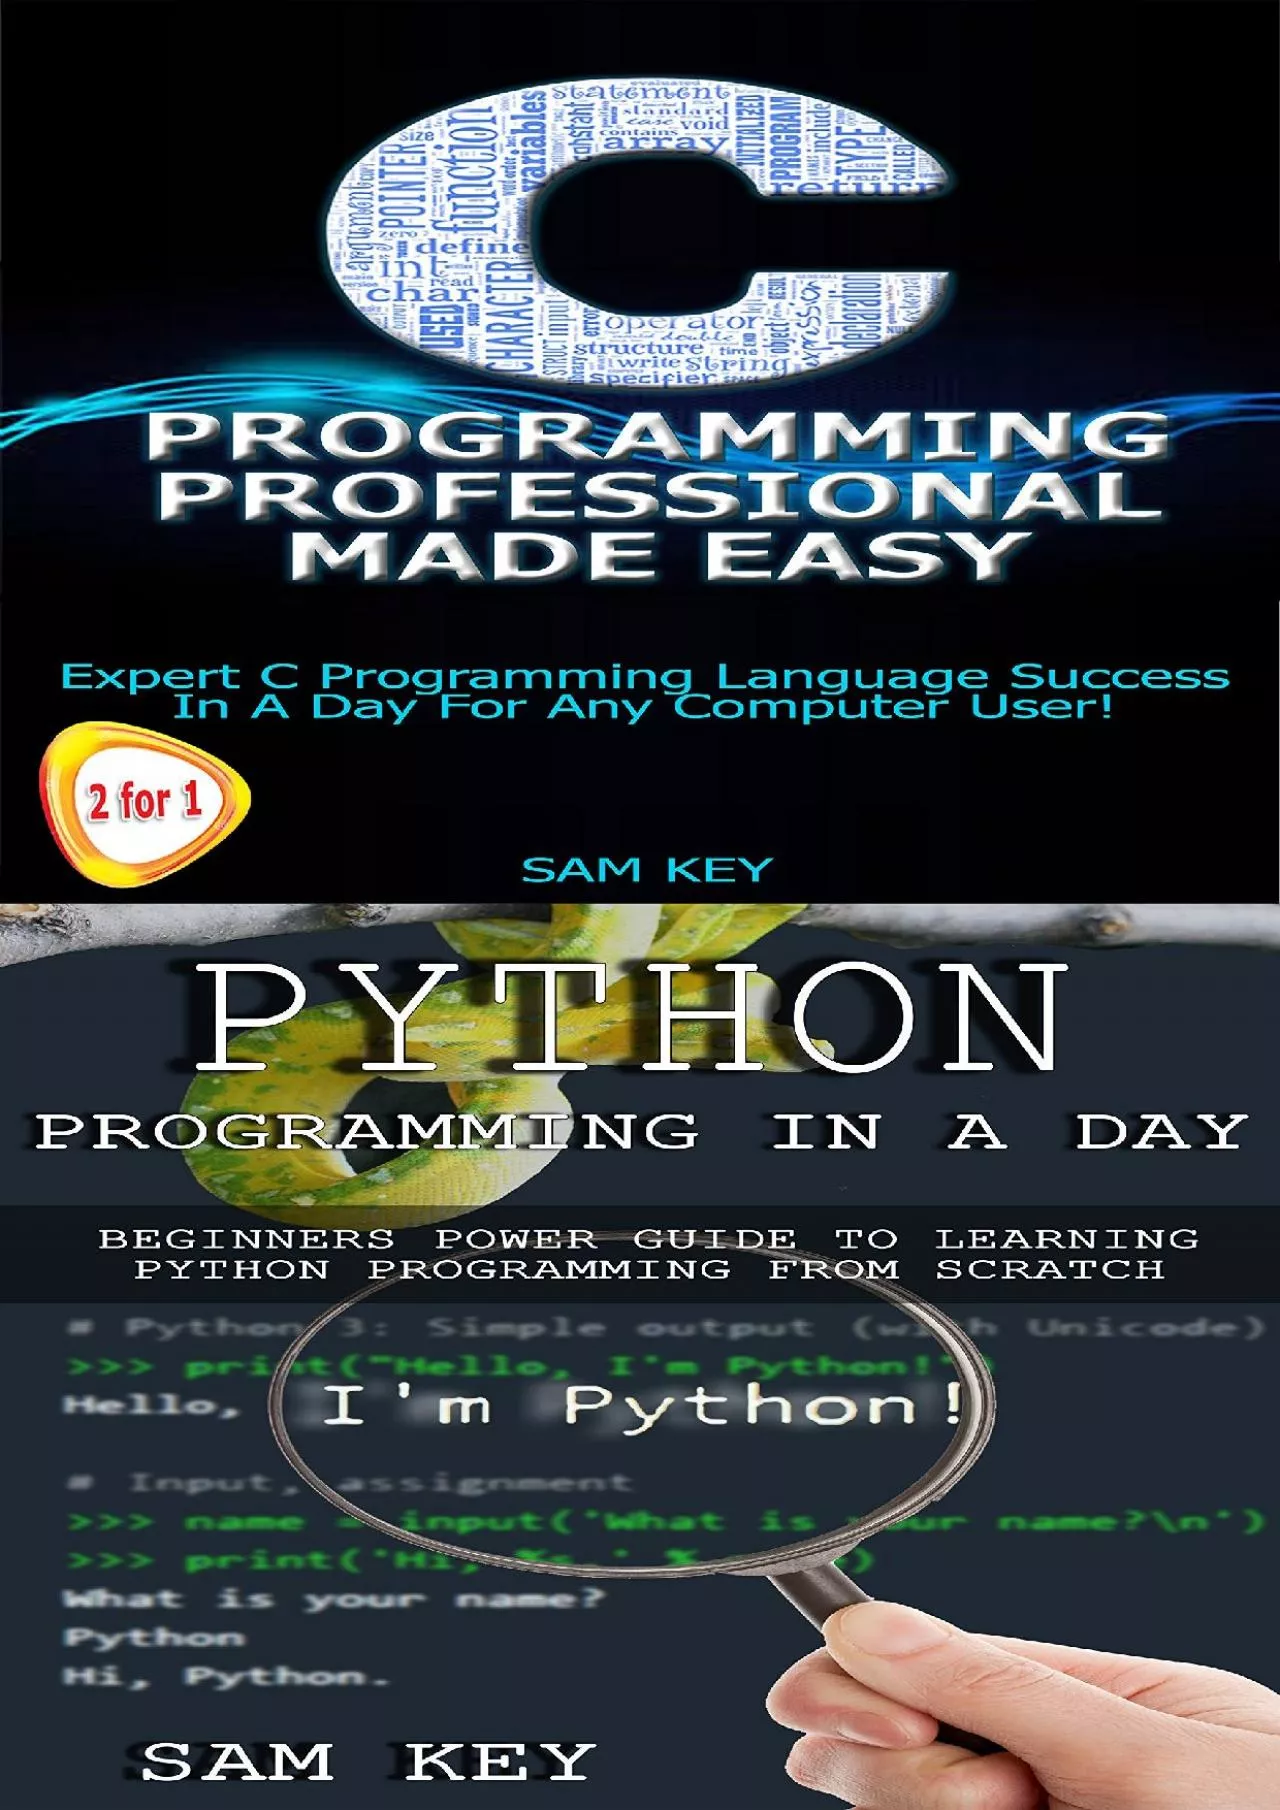 [FREE]-Programming 16: Python Programming In A Day & C Programming Professional Made Easy